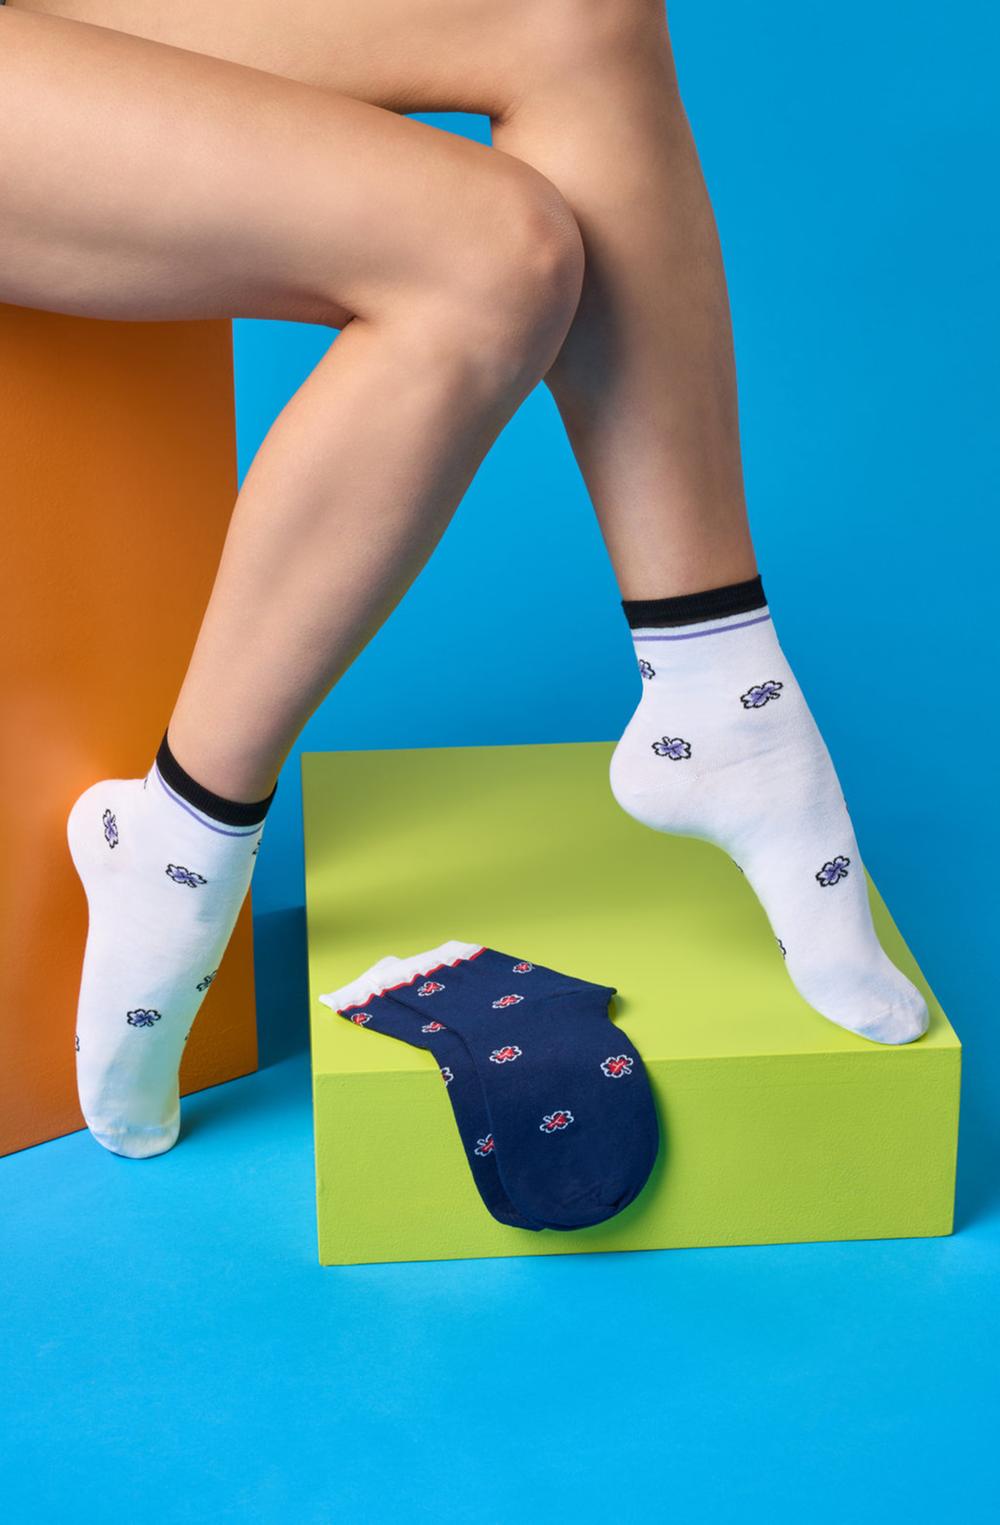 SiSi Luck Calzino - Quarter high cotton ankle socks with a small dotted shamrock style pattern, striped cuff with silver lamé stripe cuff, shaped heel and flat toe seam.